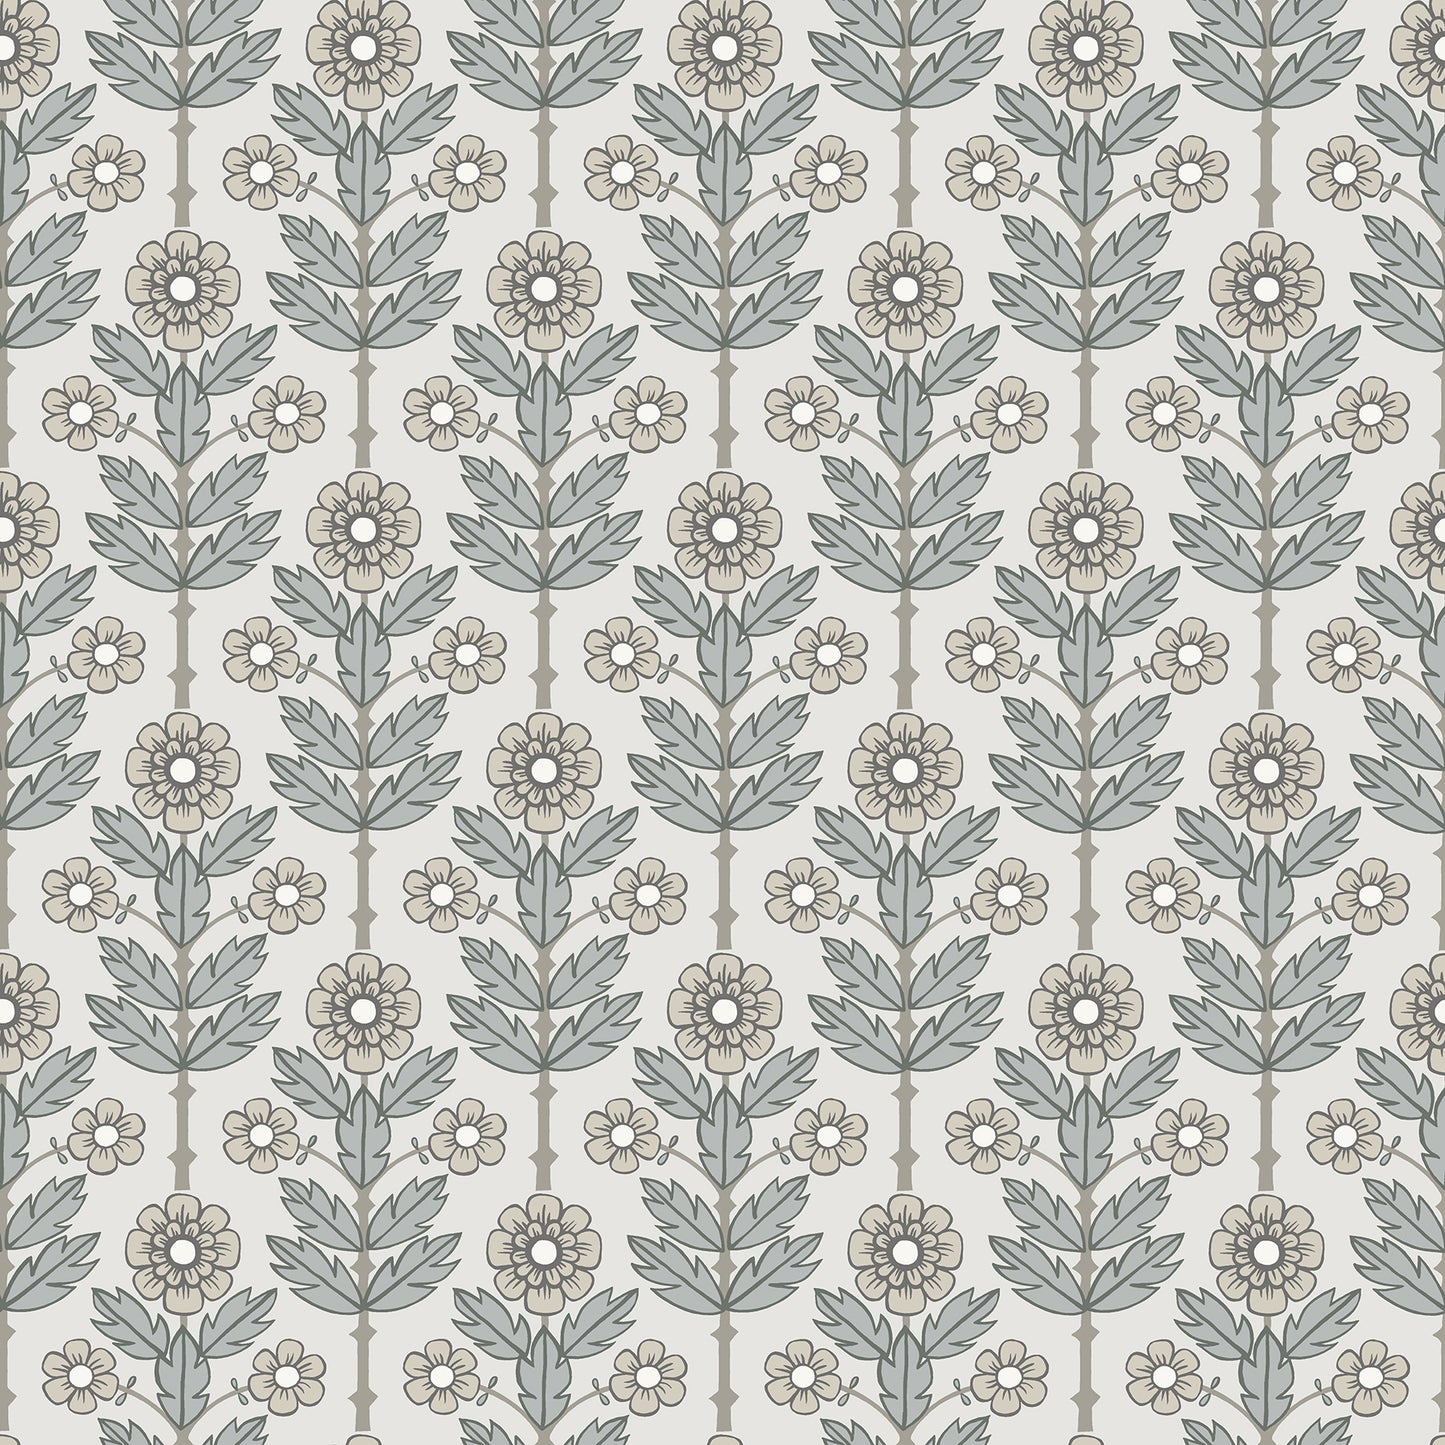 Acquire 2948-28005 Spring Aya White Floral White A-Street Prints Wallpaper